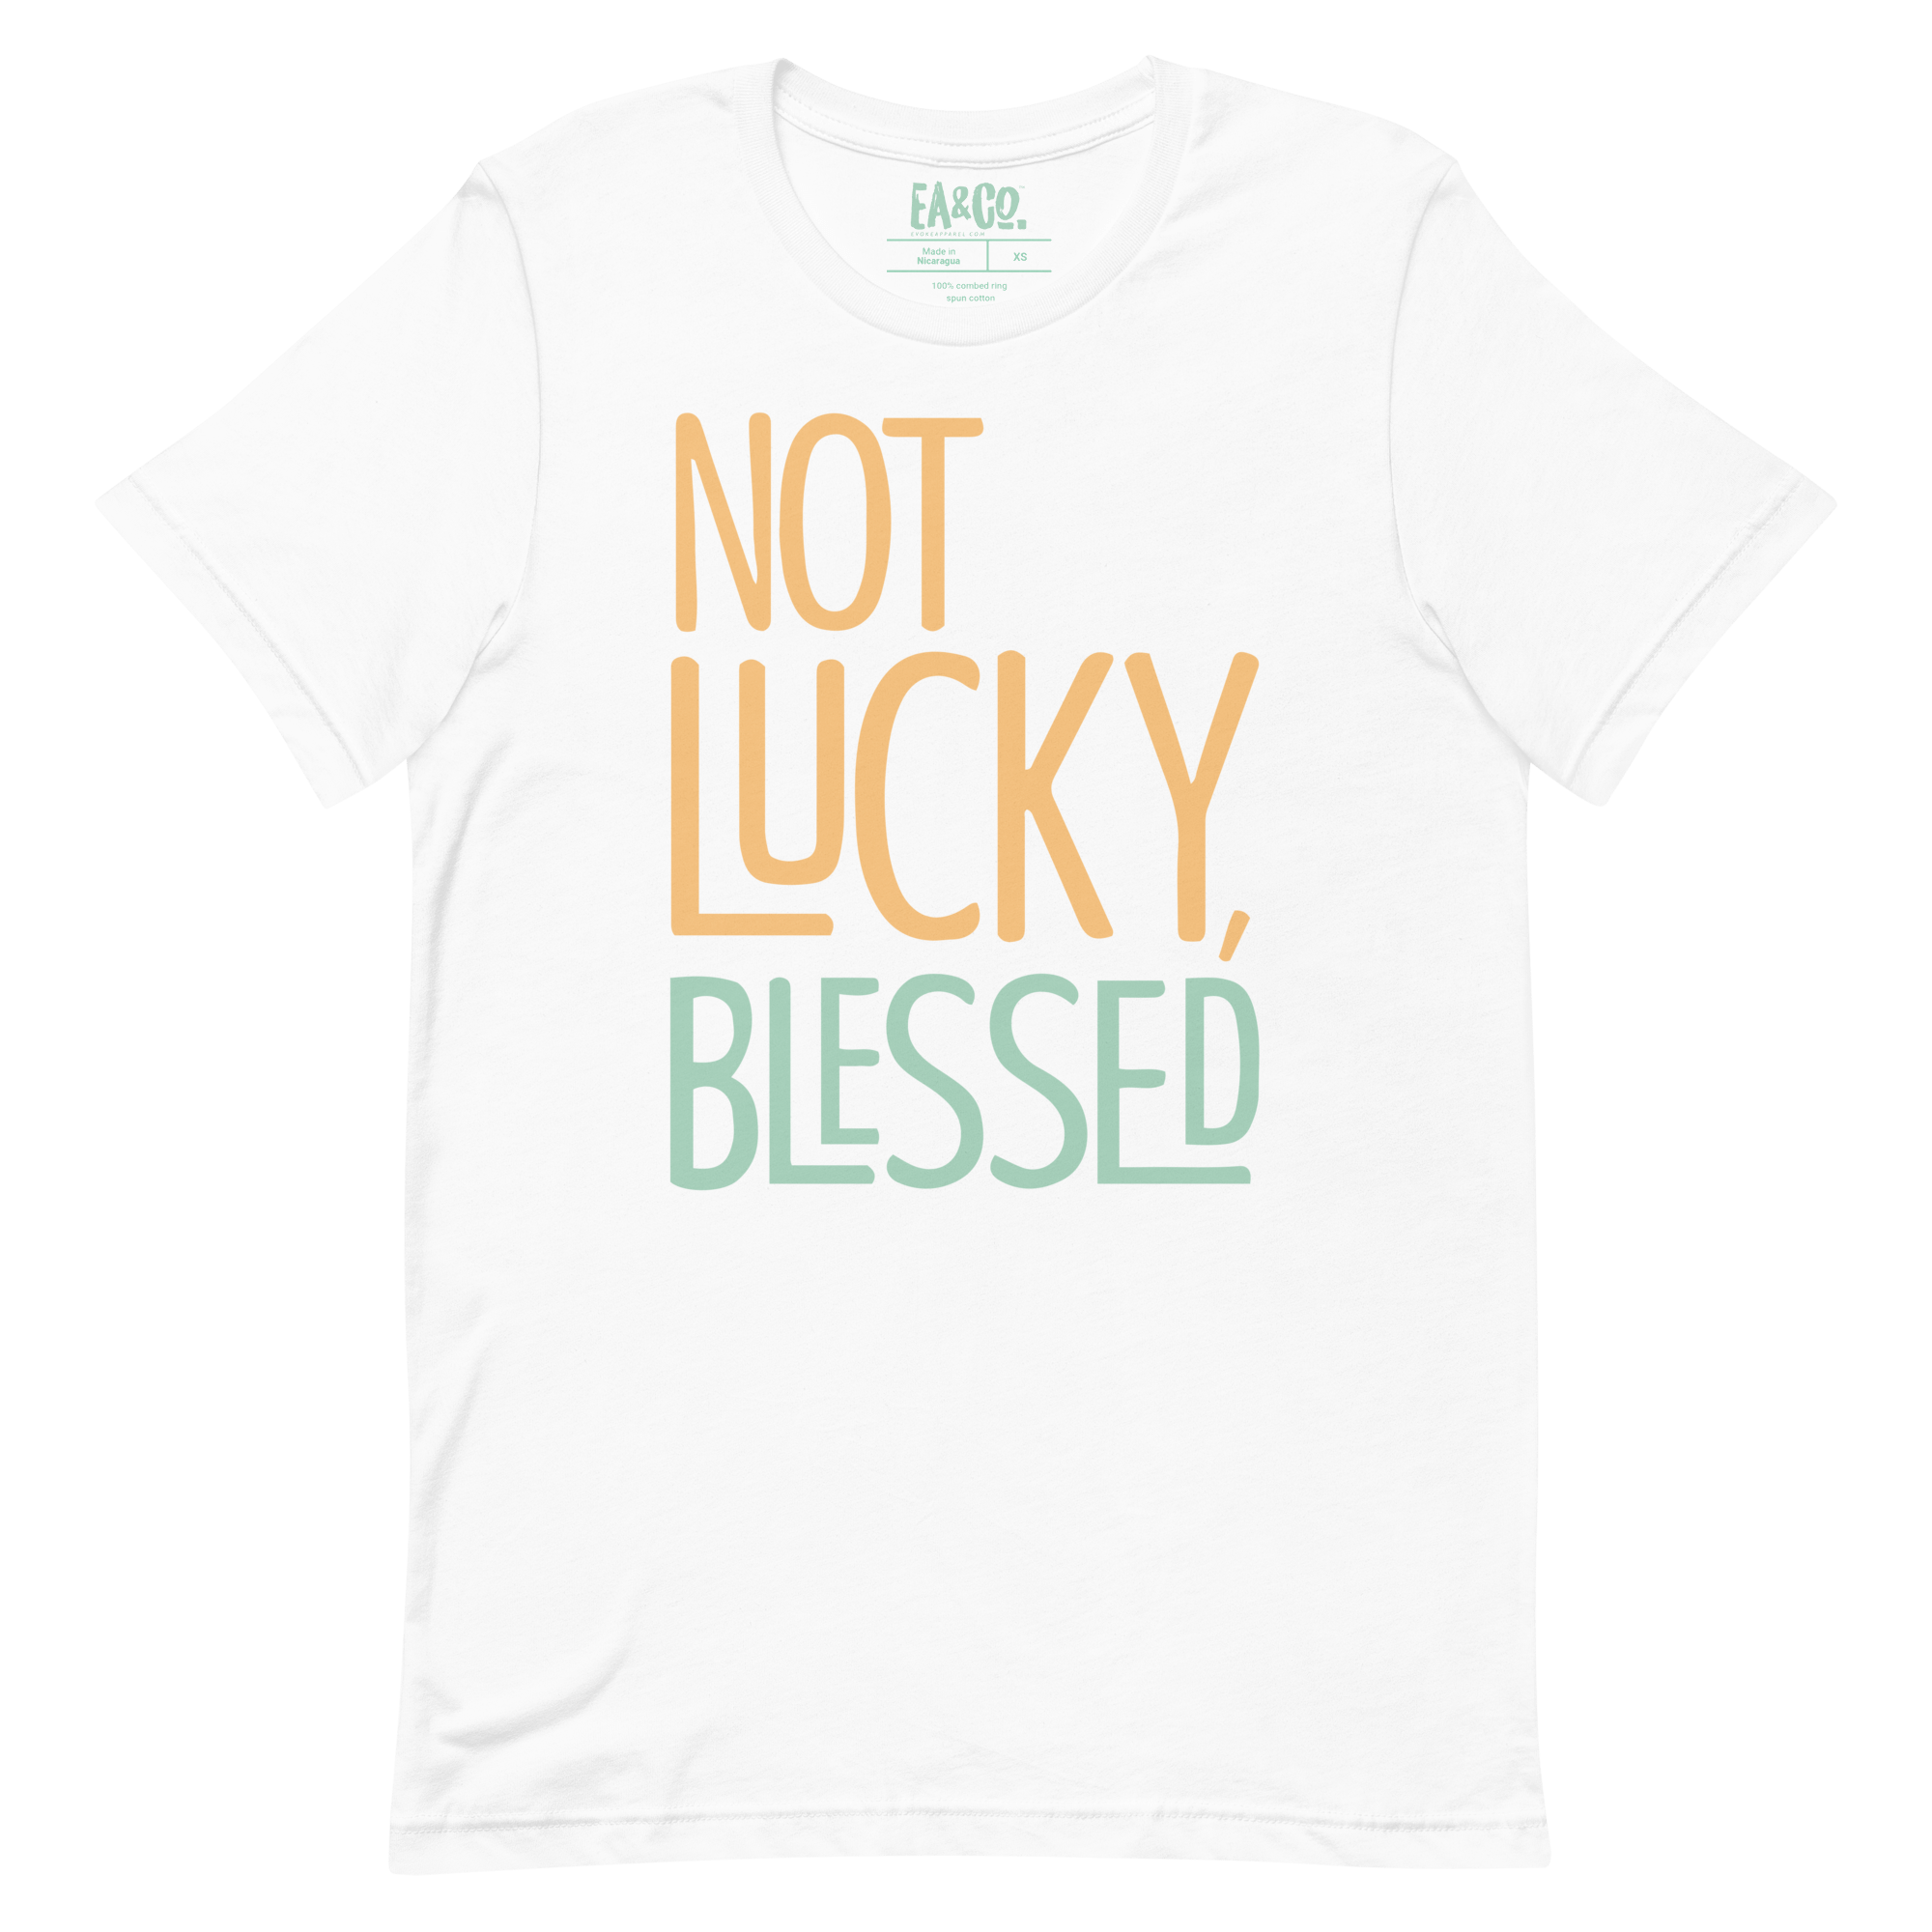 Not Lucky, Blessed Tee